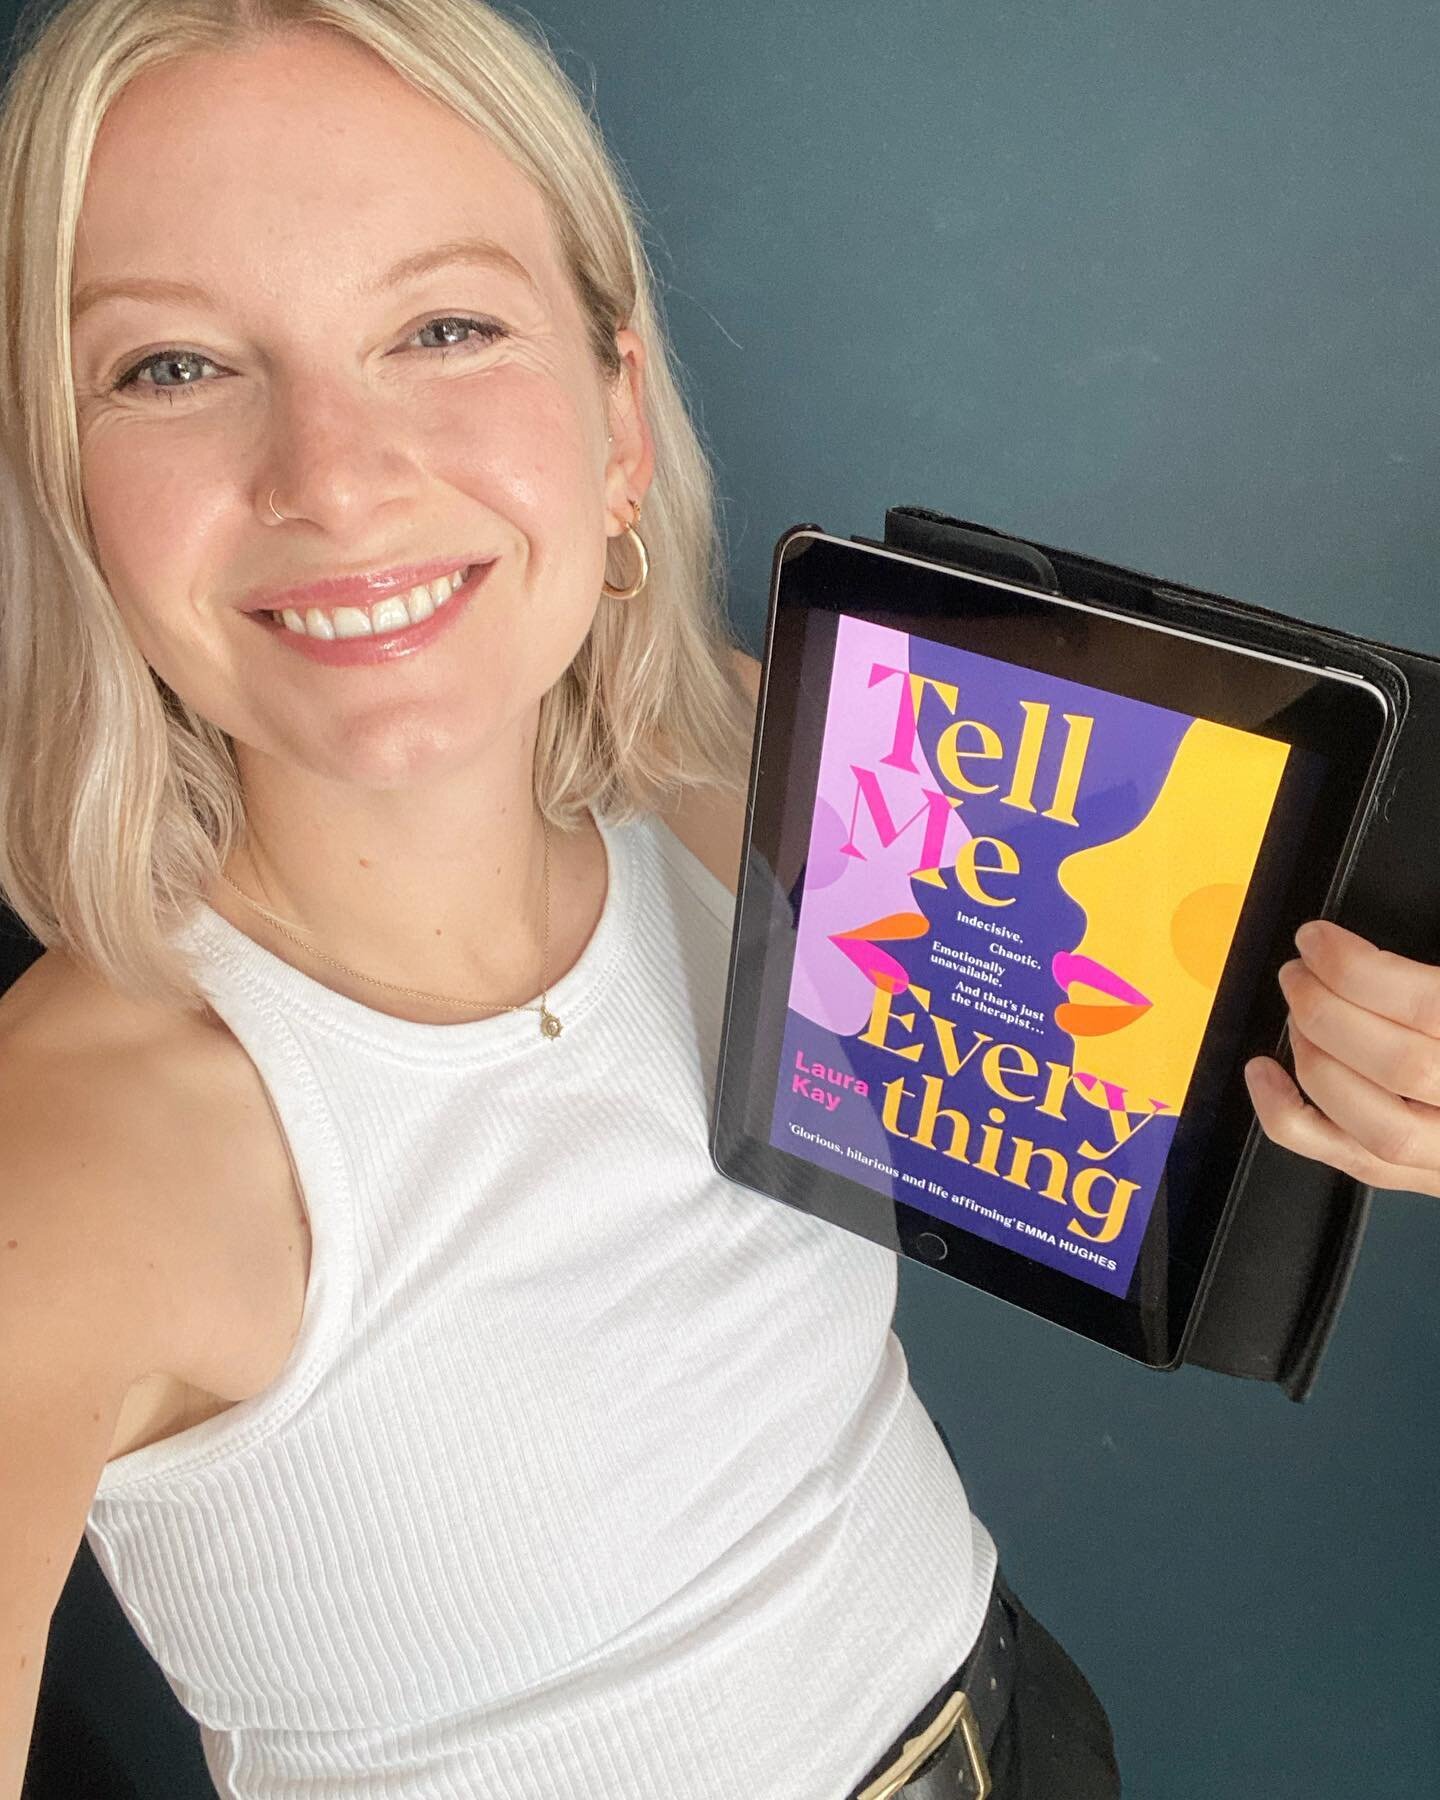 Took the opportunity when I was briefly out of goblin mode yesterday to take some very natural photos of me with someone else&rsquo;s iPad BECAUSE Tell Me Everything is 99p/$0.99 in the UK and US/Canada for the whole of July! 

But what is it even ab